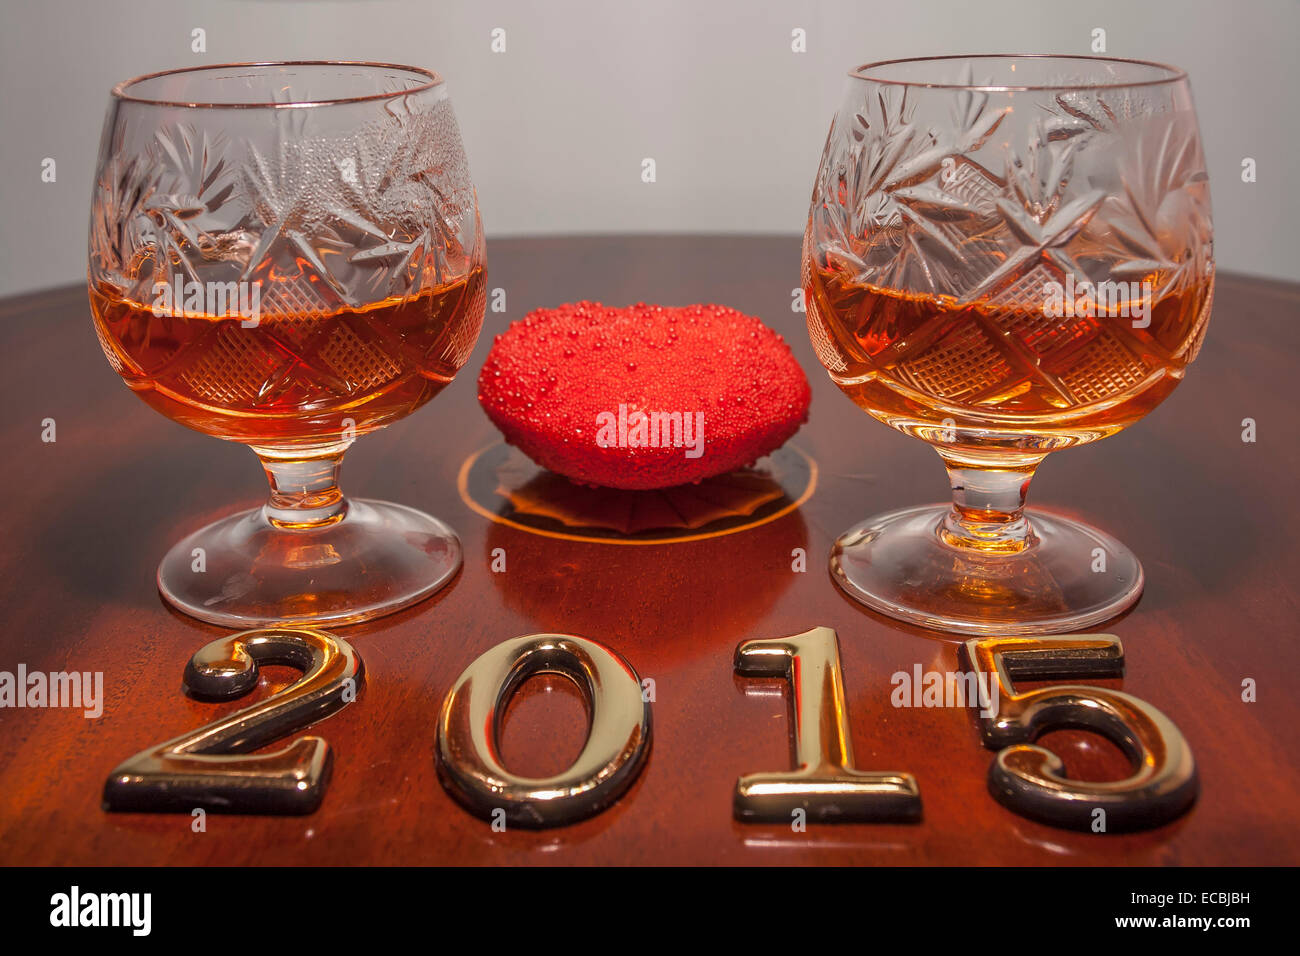 Gold 2015 New year text and two glasses of cognac Stock Photo